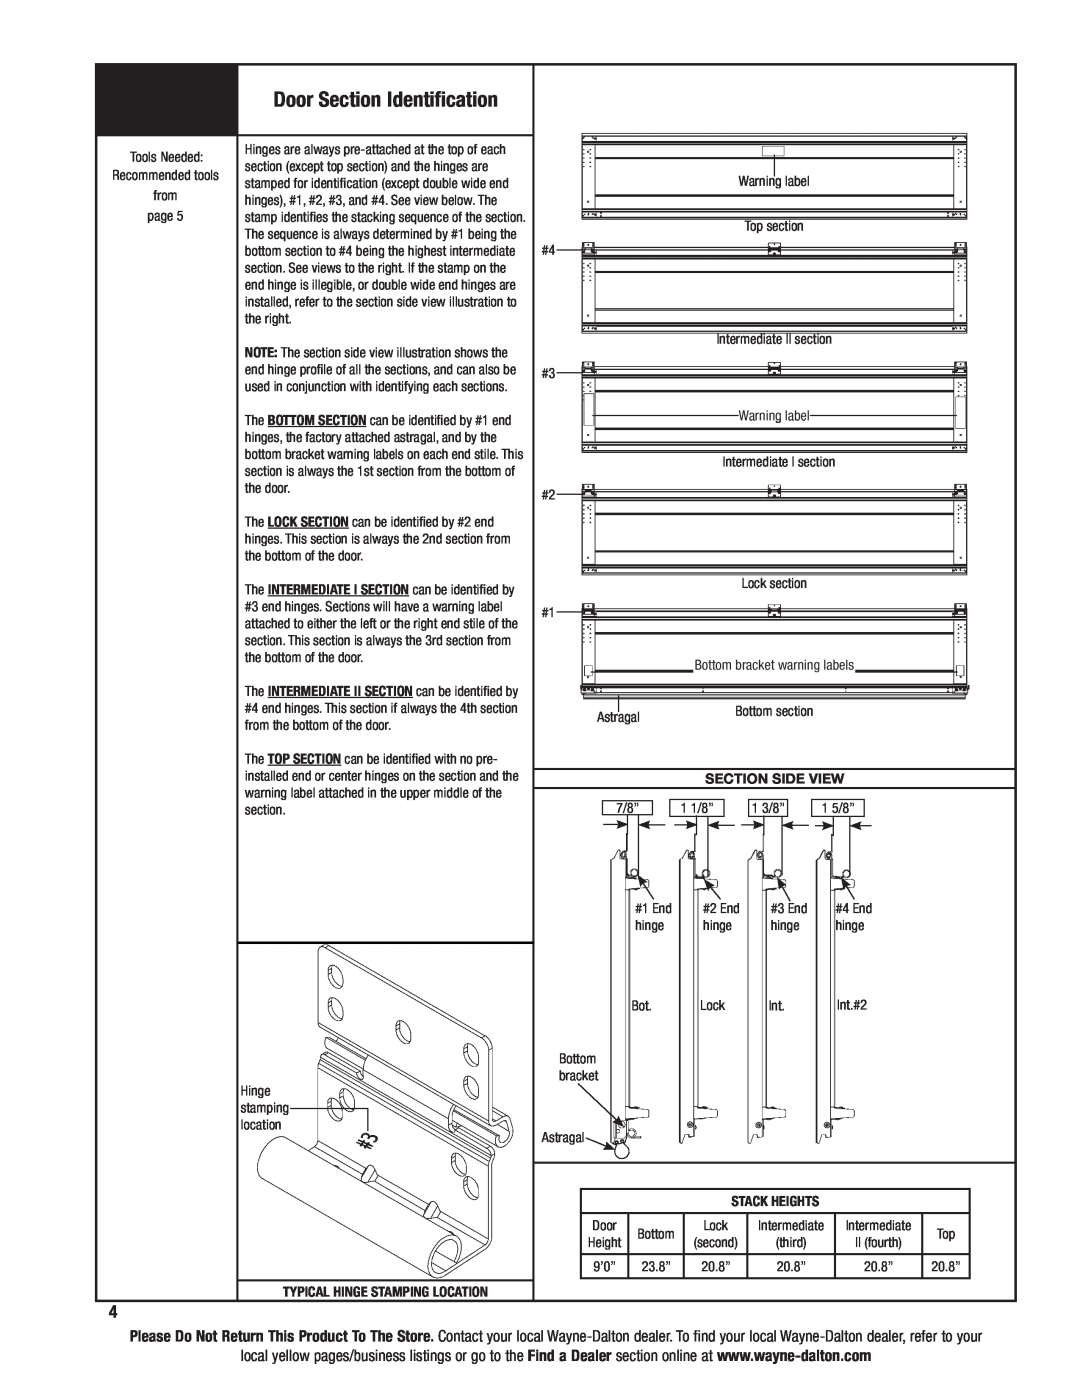 Wayne-Dalton 6100 installation instructions Door Section Identification, SECTION side view 